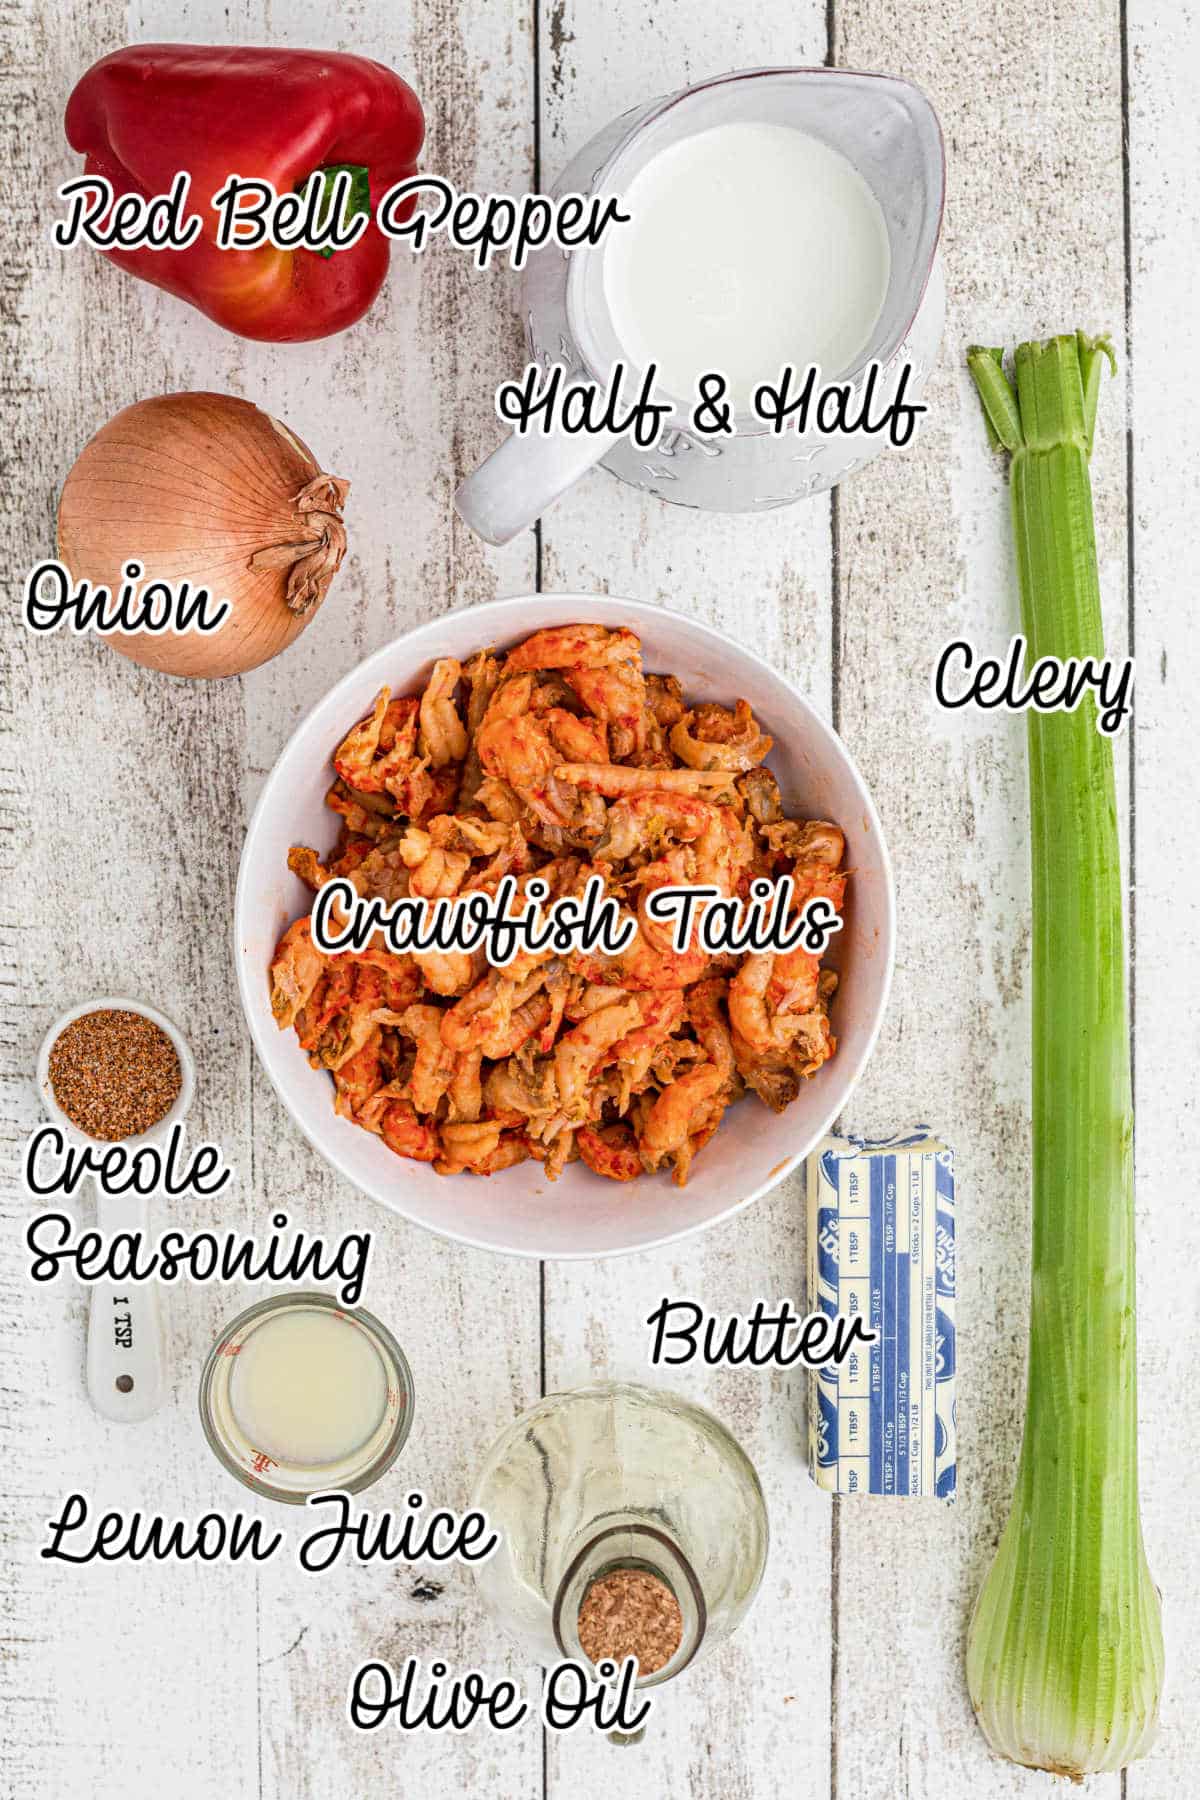 Ingredients laid out with text overlay, showing what is used to make a crawfish sauce.